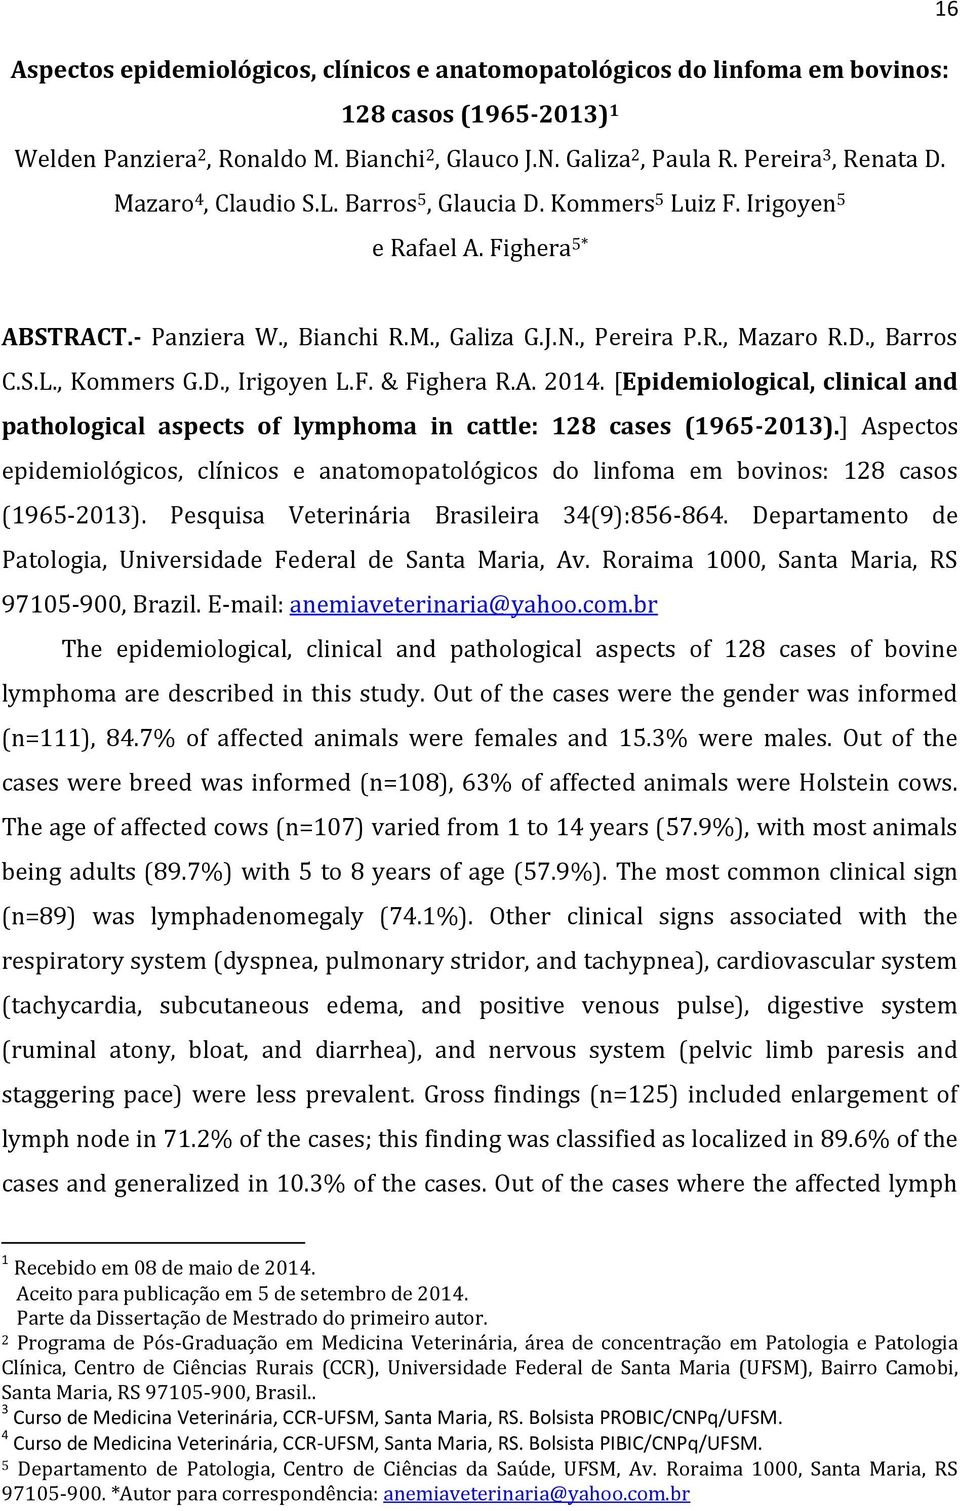 D., Irigoyen L.F. & Fighera R.A. 2014. [Epidemiological, clinical and pathological aspects of lymphoma in cattle: 128 cases (1965-2013).